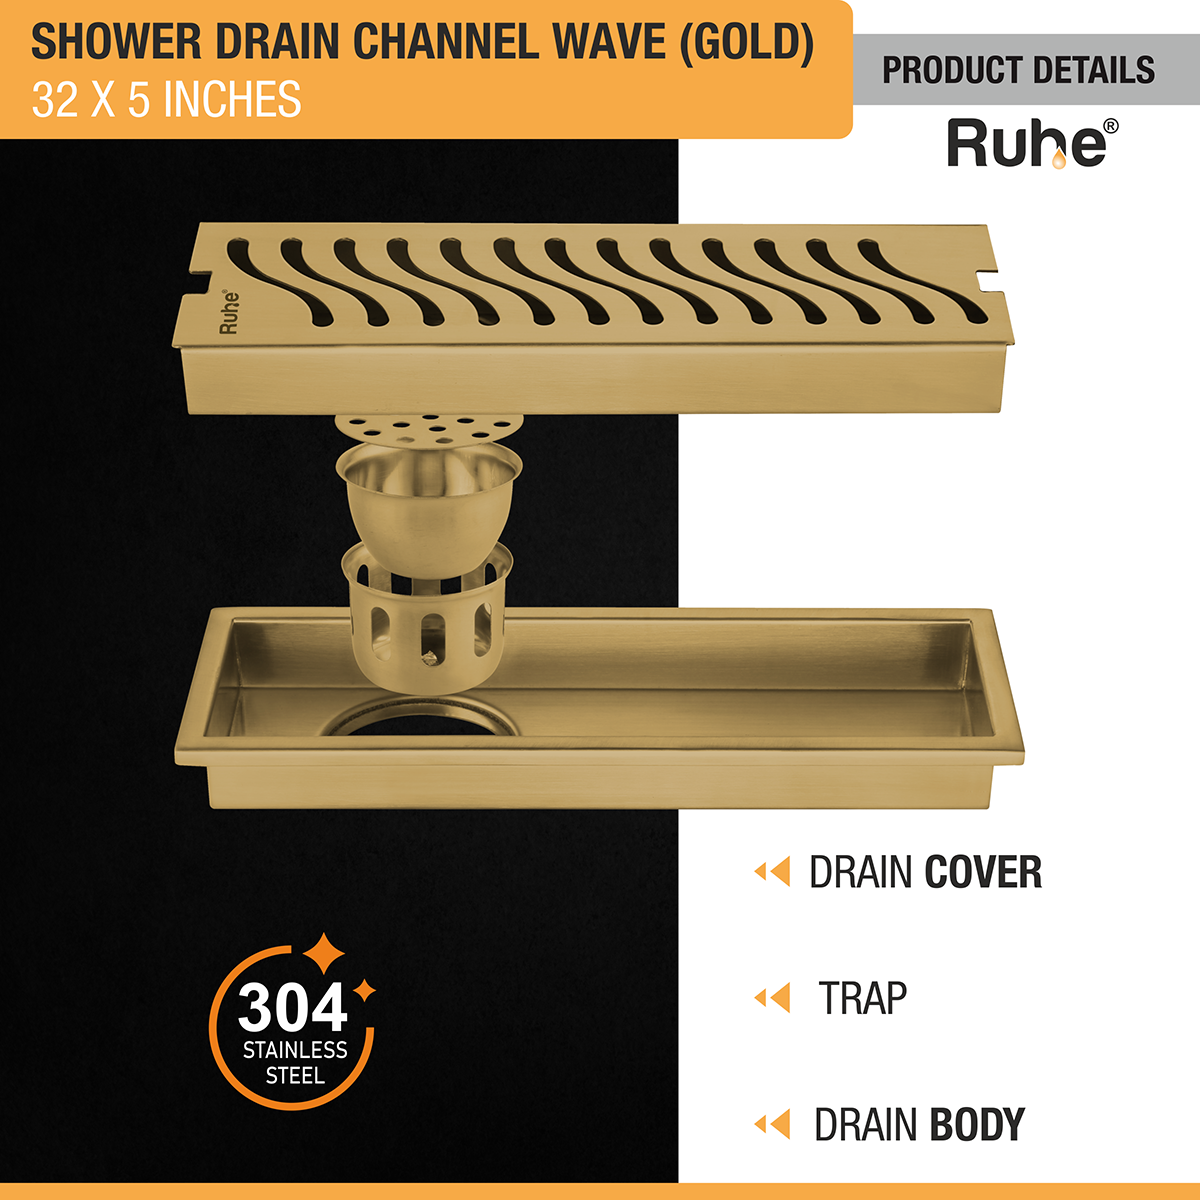 Wave Shower Drain Channel (32 x 5 Inches) YELLOW GOLD product details